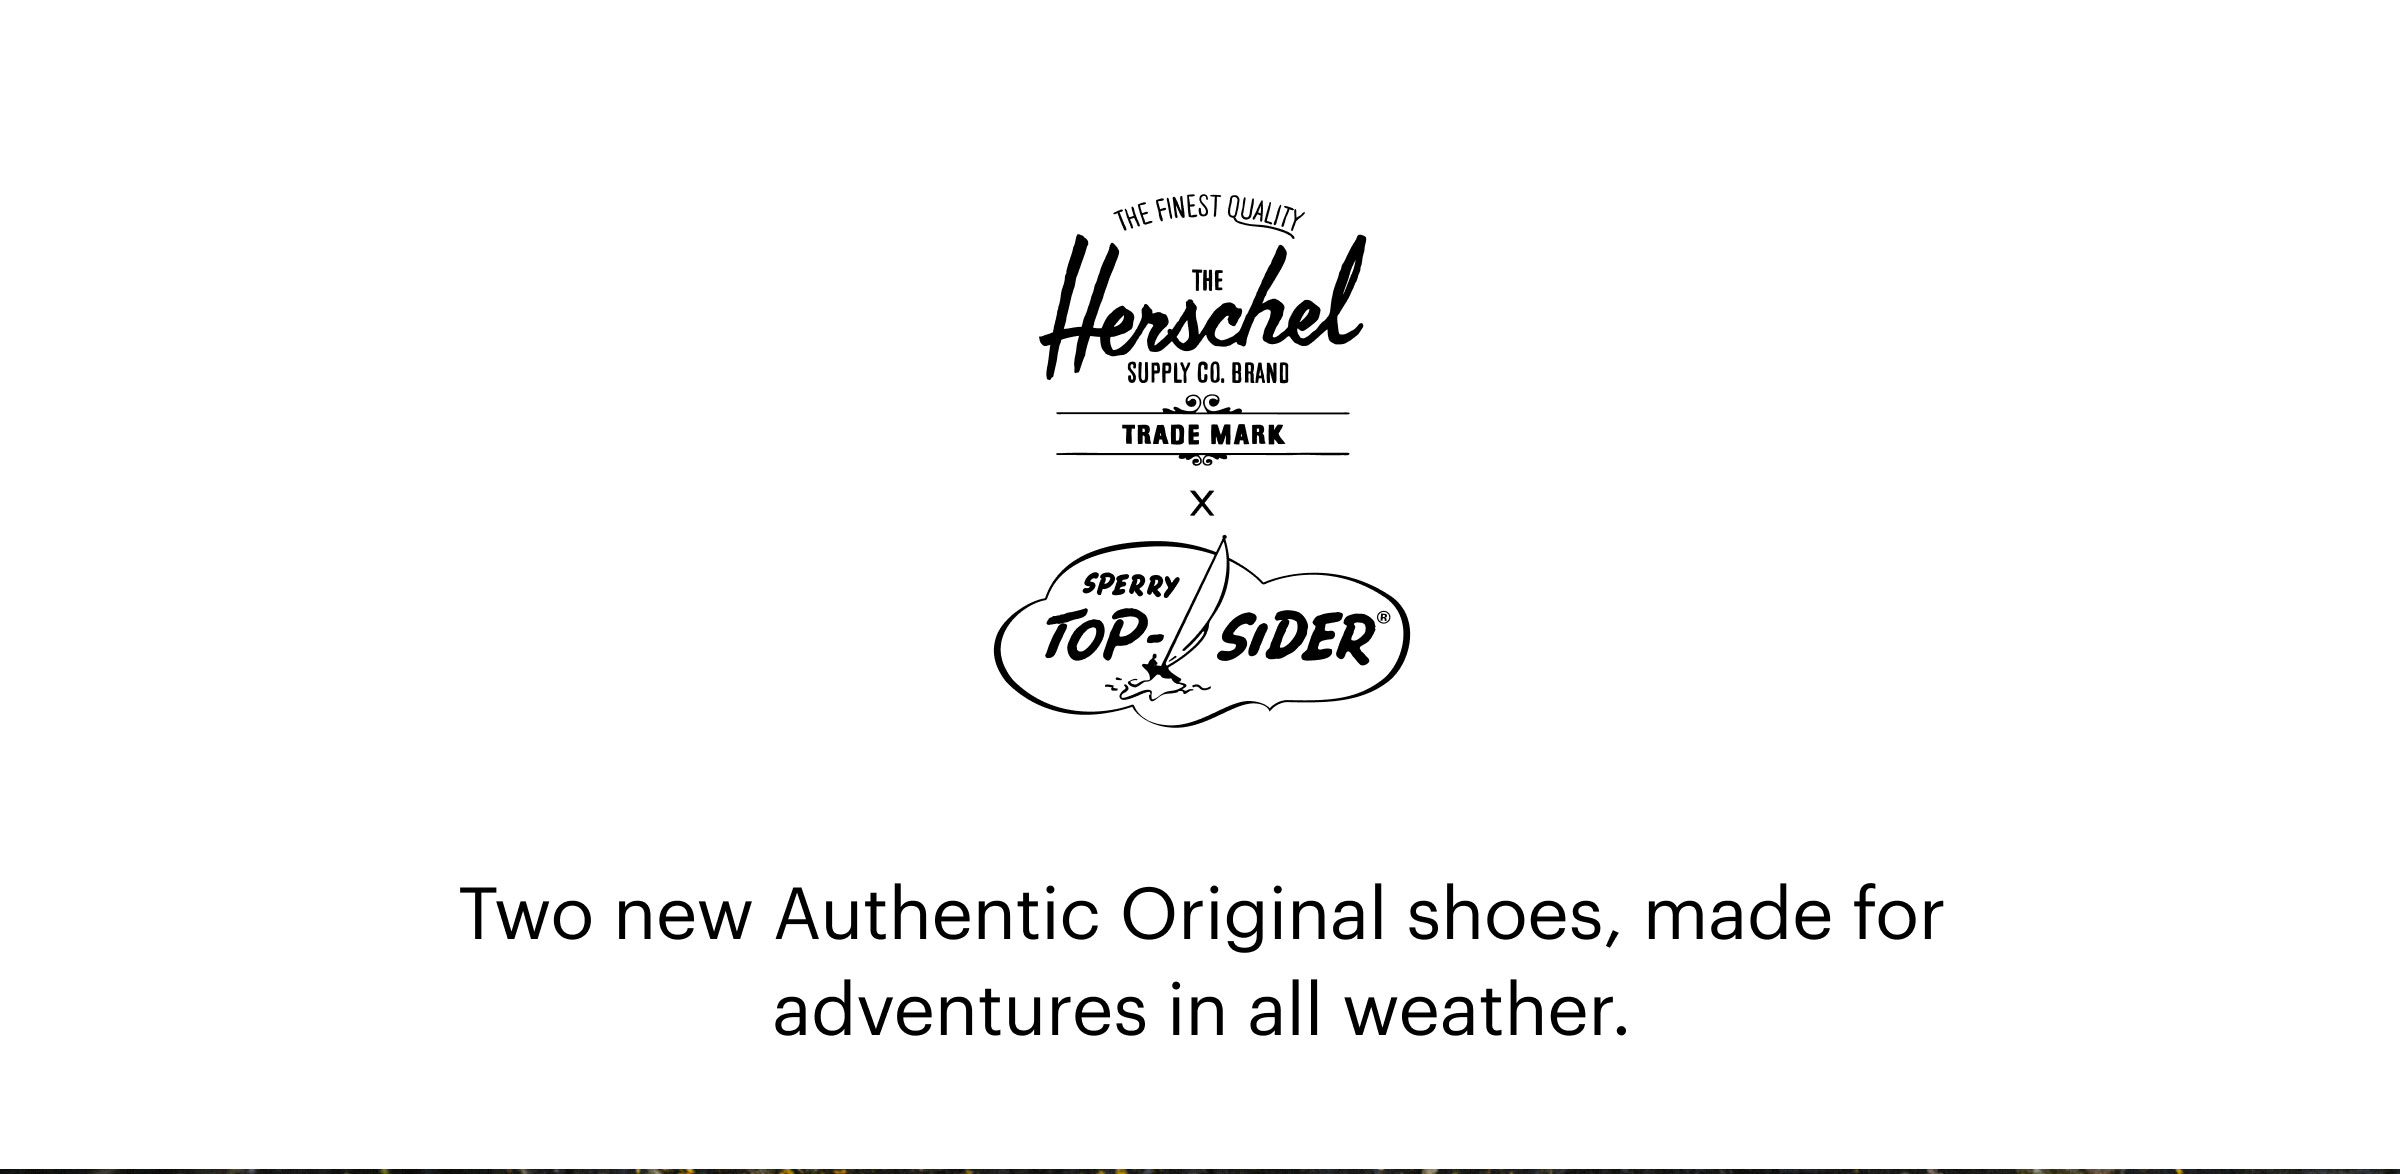  PNEST Qa7 THE SUPPLY CO. BRAND TRADE MARK X 70P.SIDER Two new Authentic Original shoes, made for adventures in all weather. 